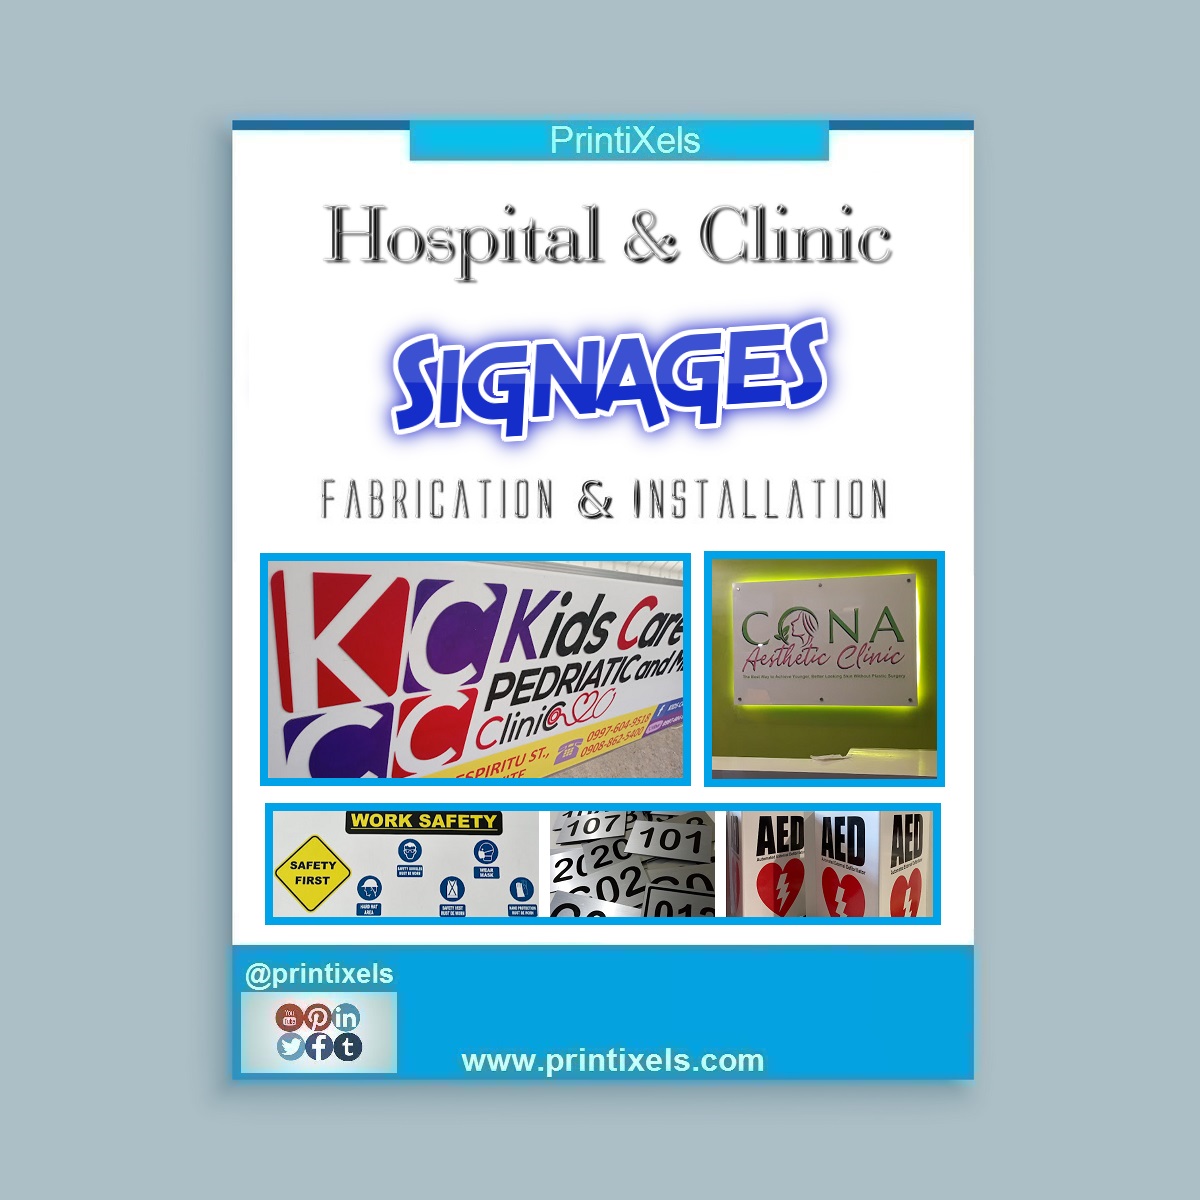 Hospital & Clinic Signages Philippines